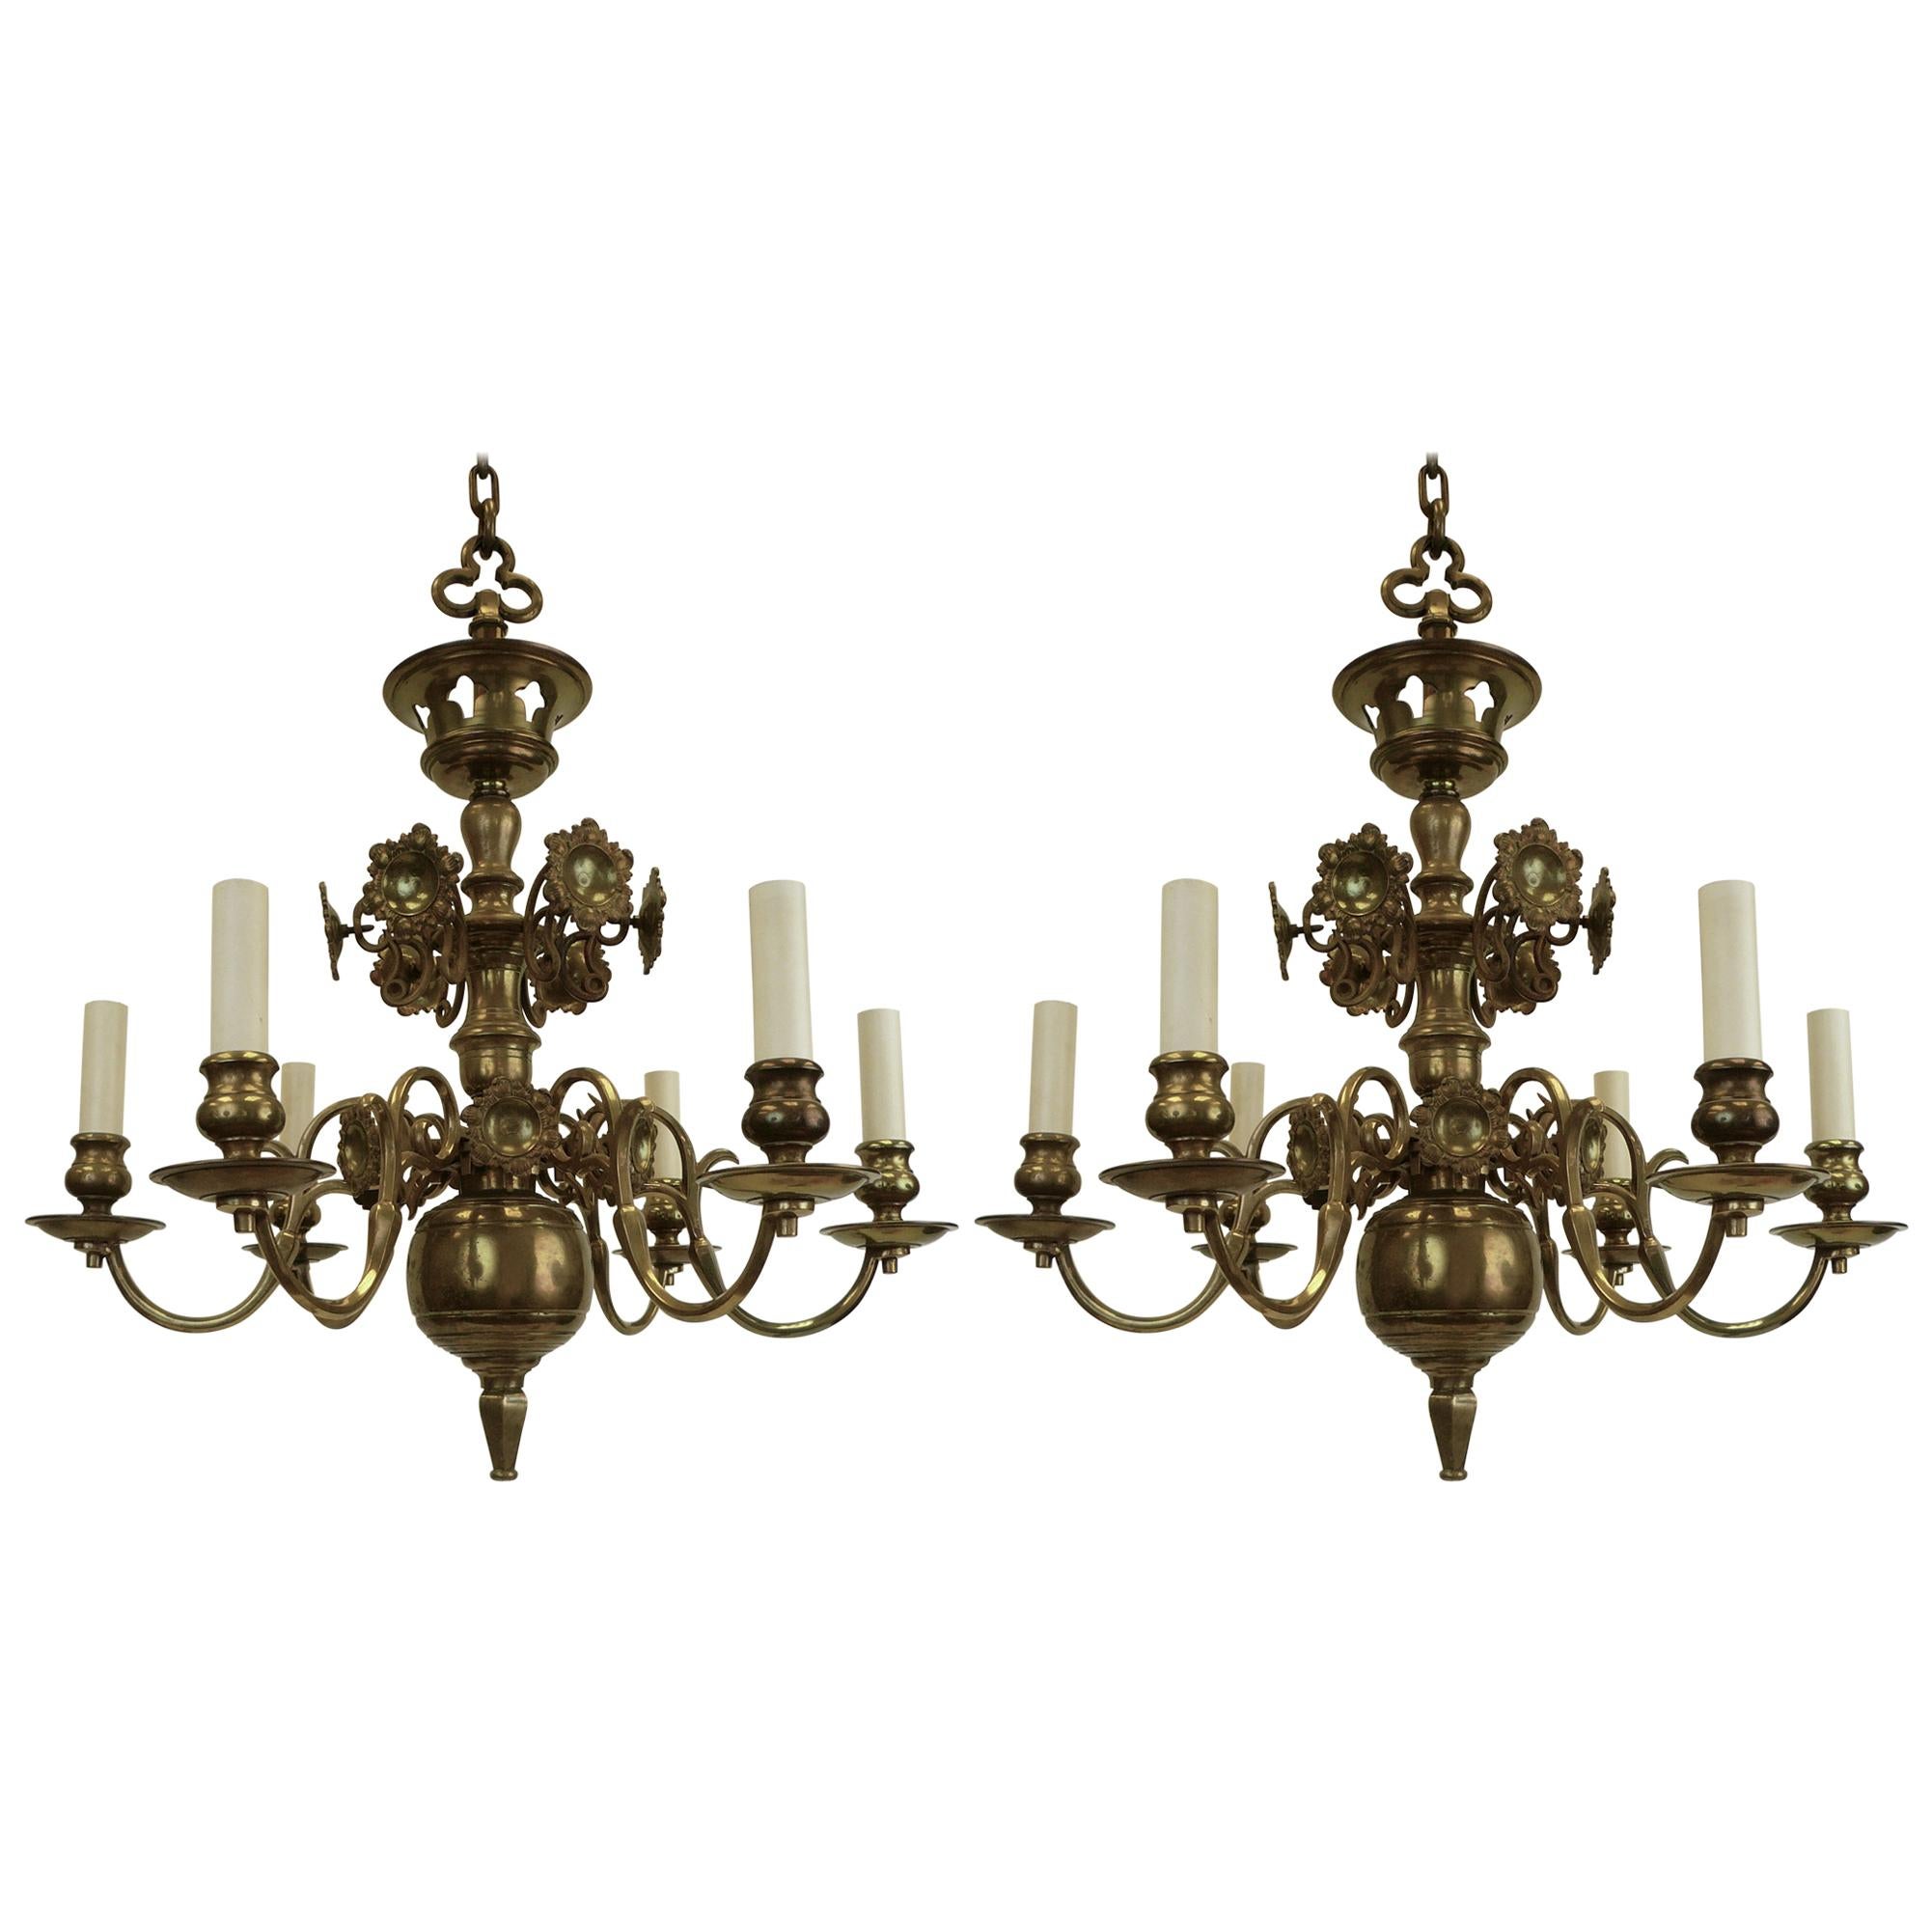 Pair of 19th Century Classic Dutch Baroque Style Brass Six-Light Chandeliers